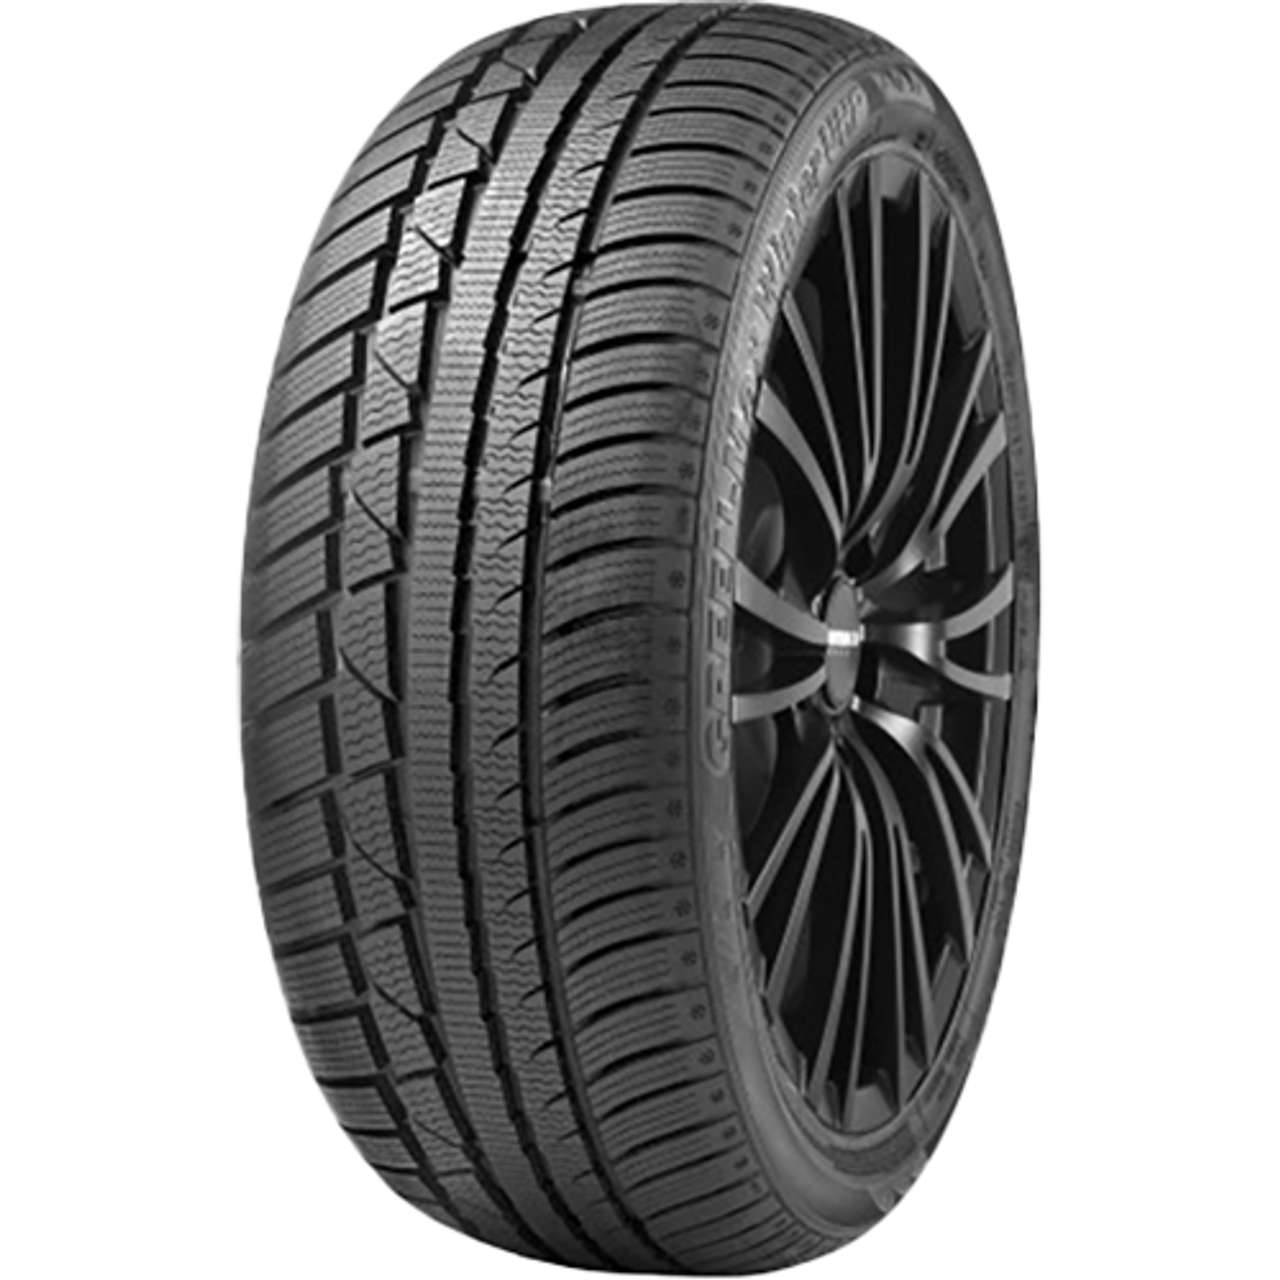 LINGLONG GREEN-MAX WINTER UHP 235/45R18 98V MFS BSW XL von LINGLONG